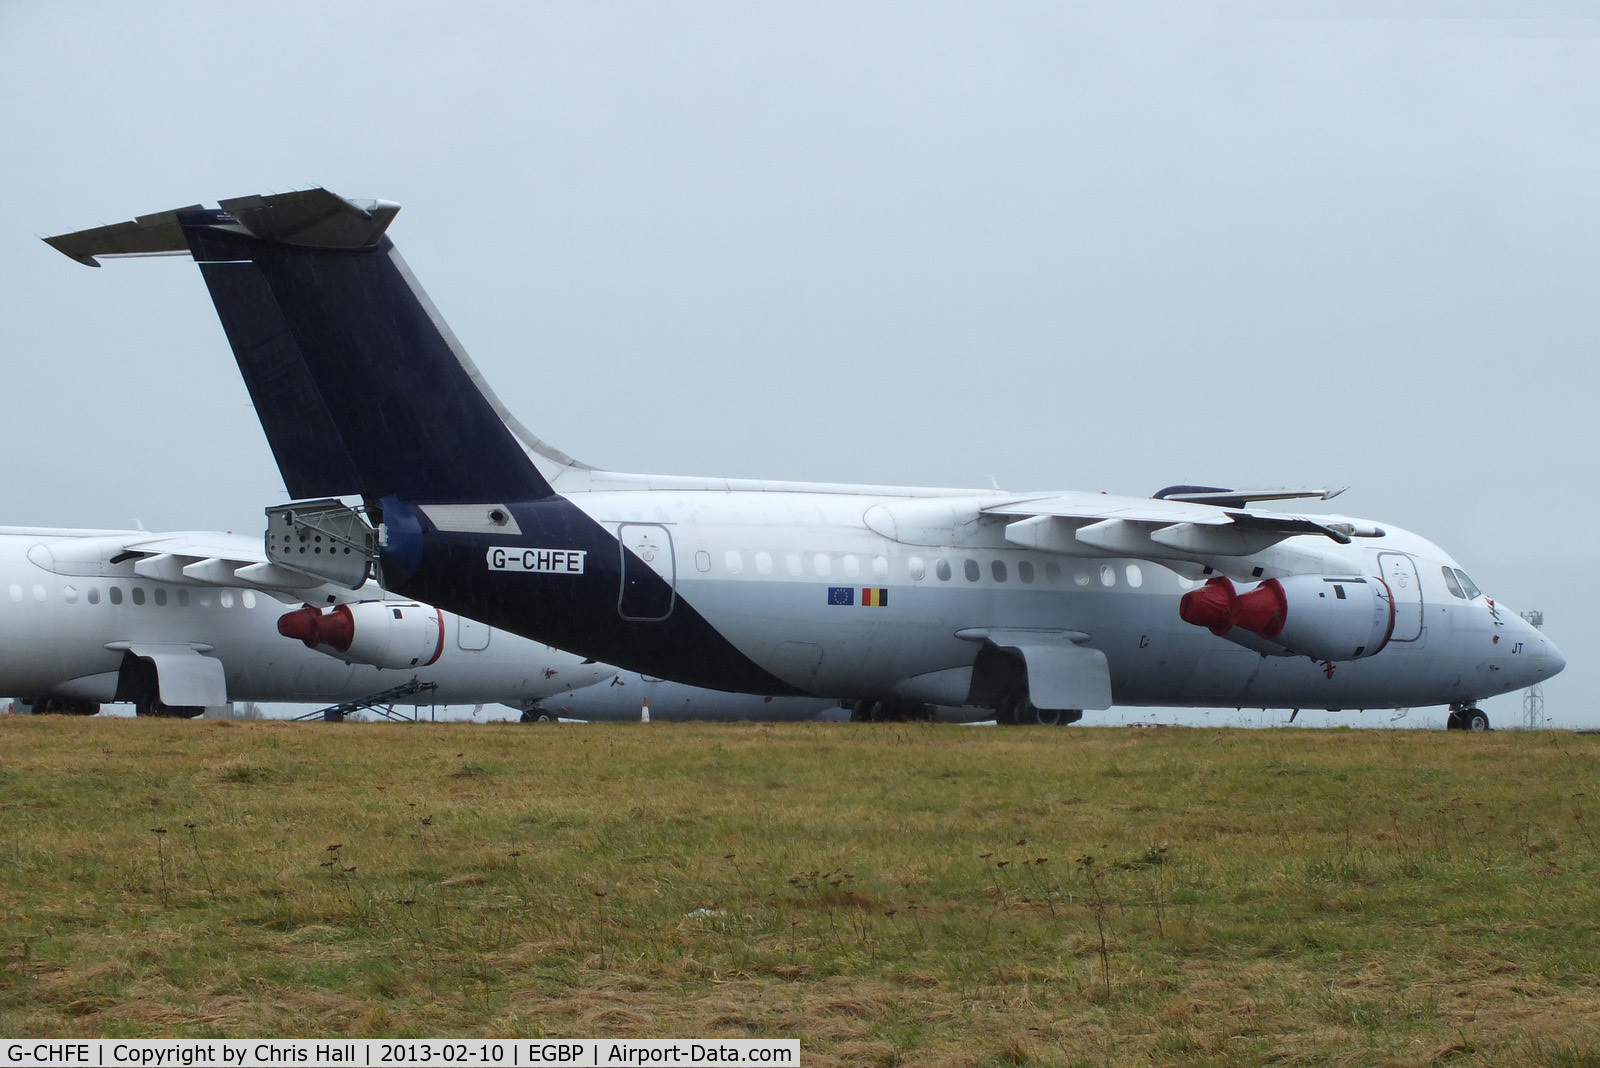 G-CHFE, 1996 British Aerospace Avro 146-RJ85 C/N E.2294, ex OO-DJT Brussels Airlines in storage at Kemble